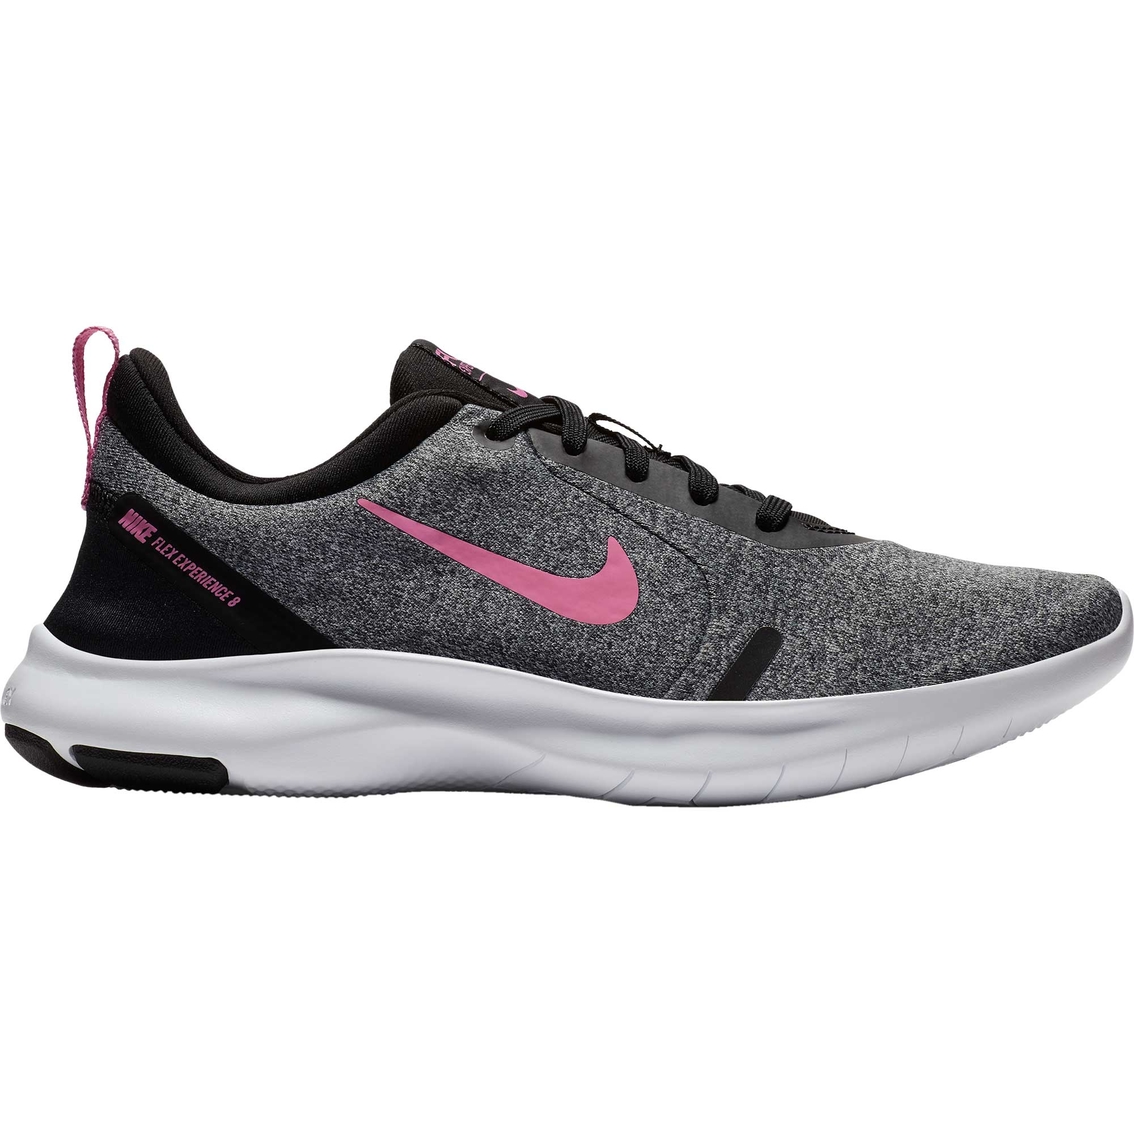 Nike Womens Flex Experience Rn 8 Running Shoes Running Shoes